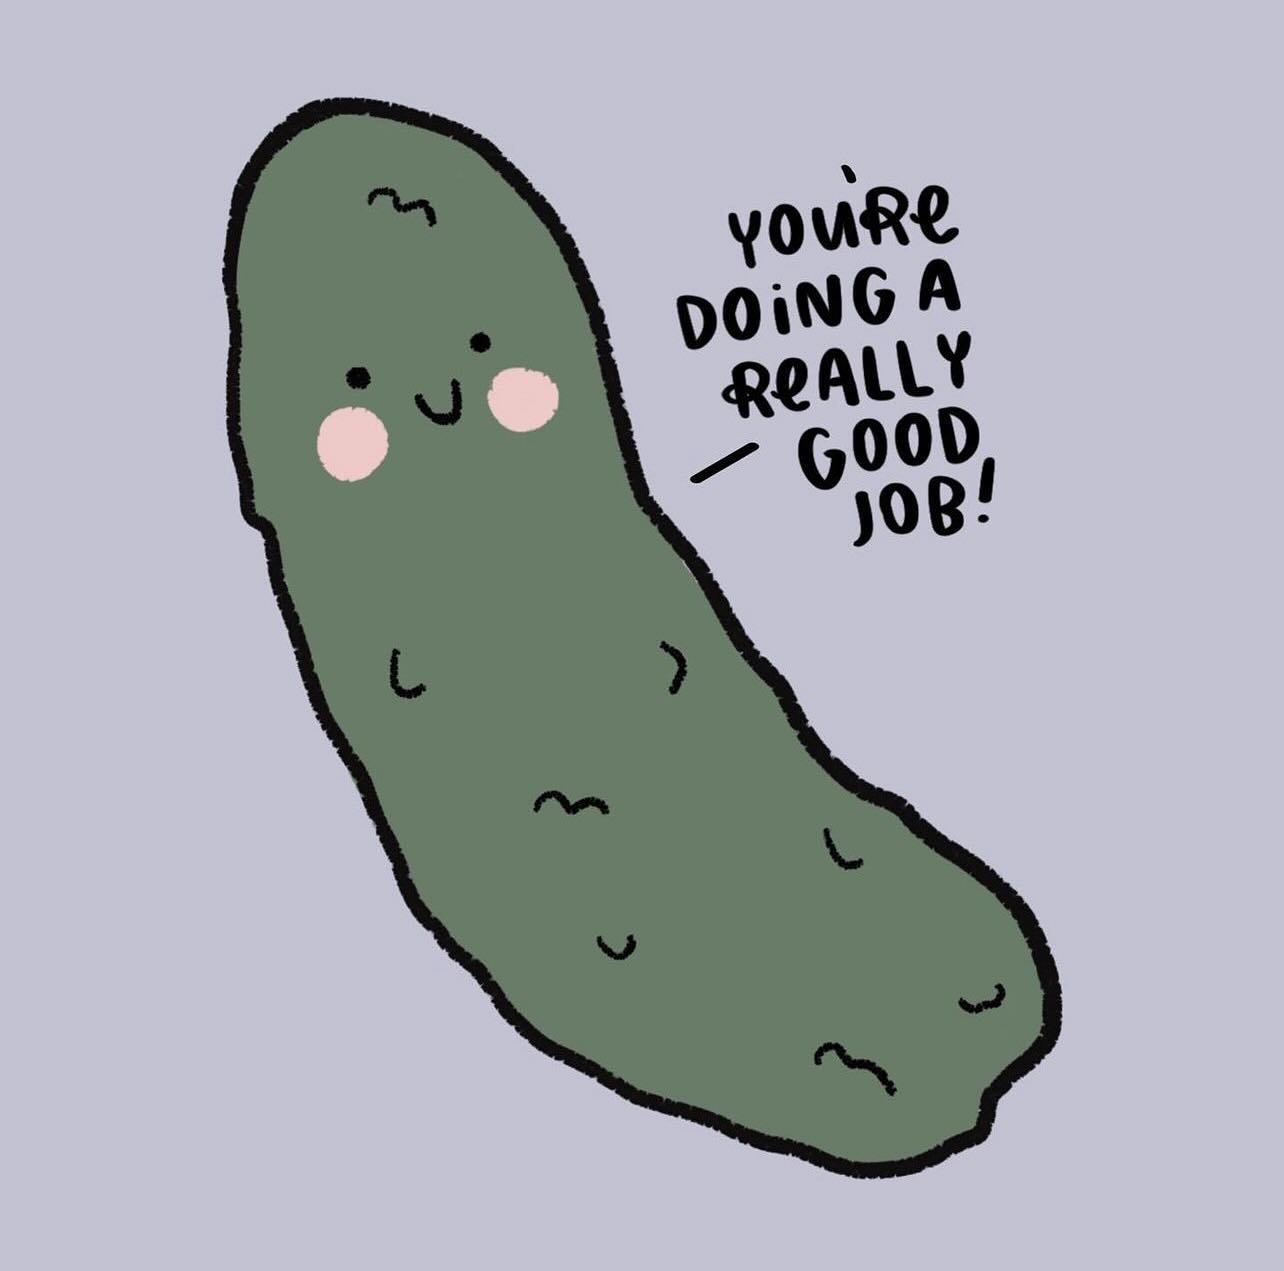 This pickle is proud of you! &hearts;️